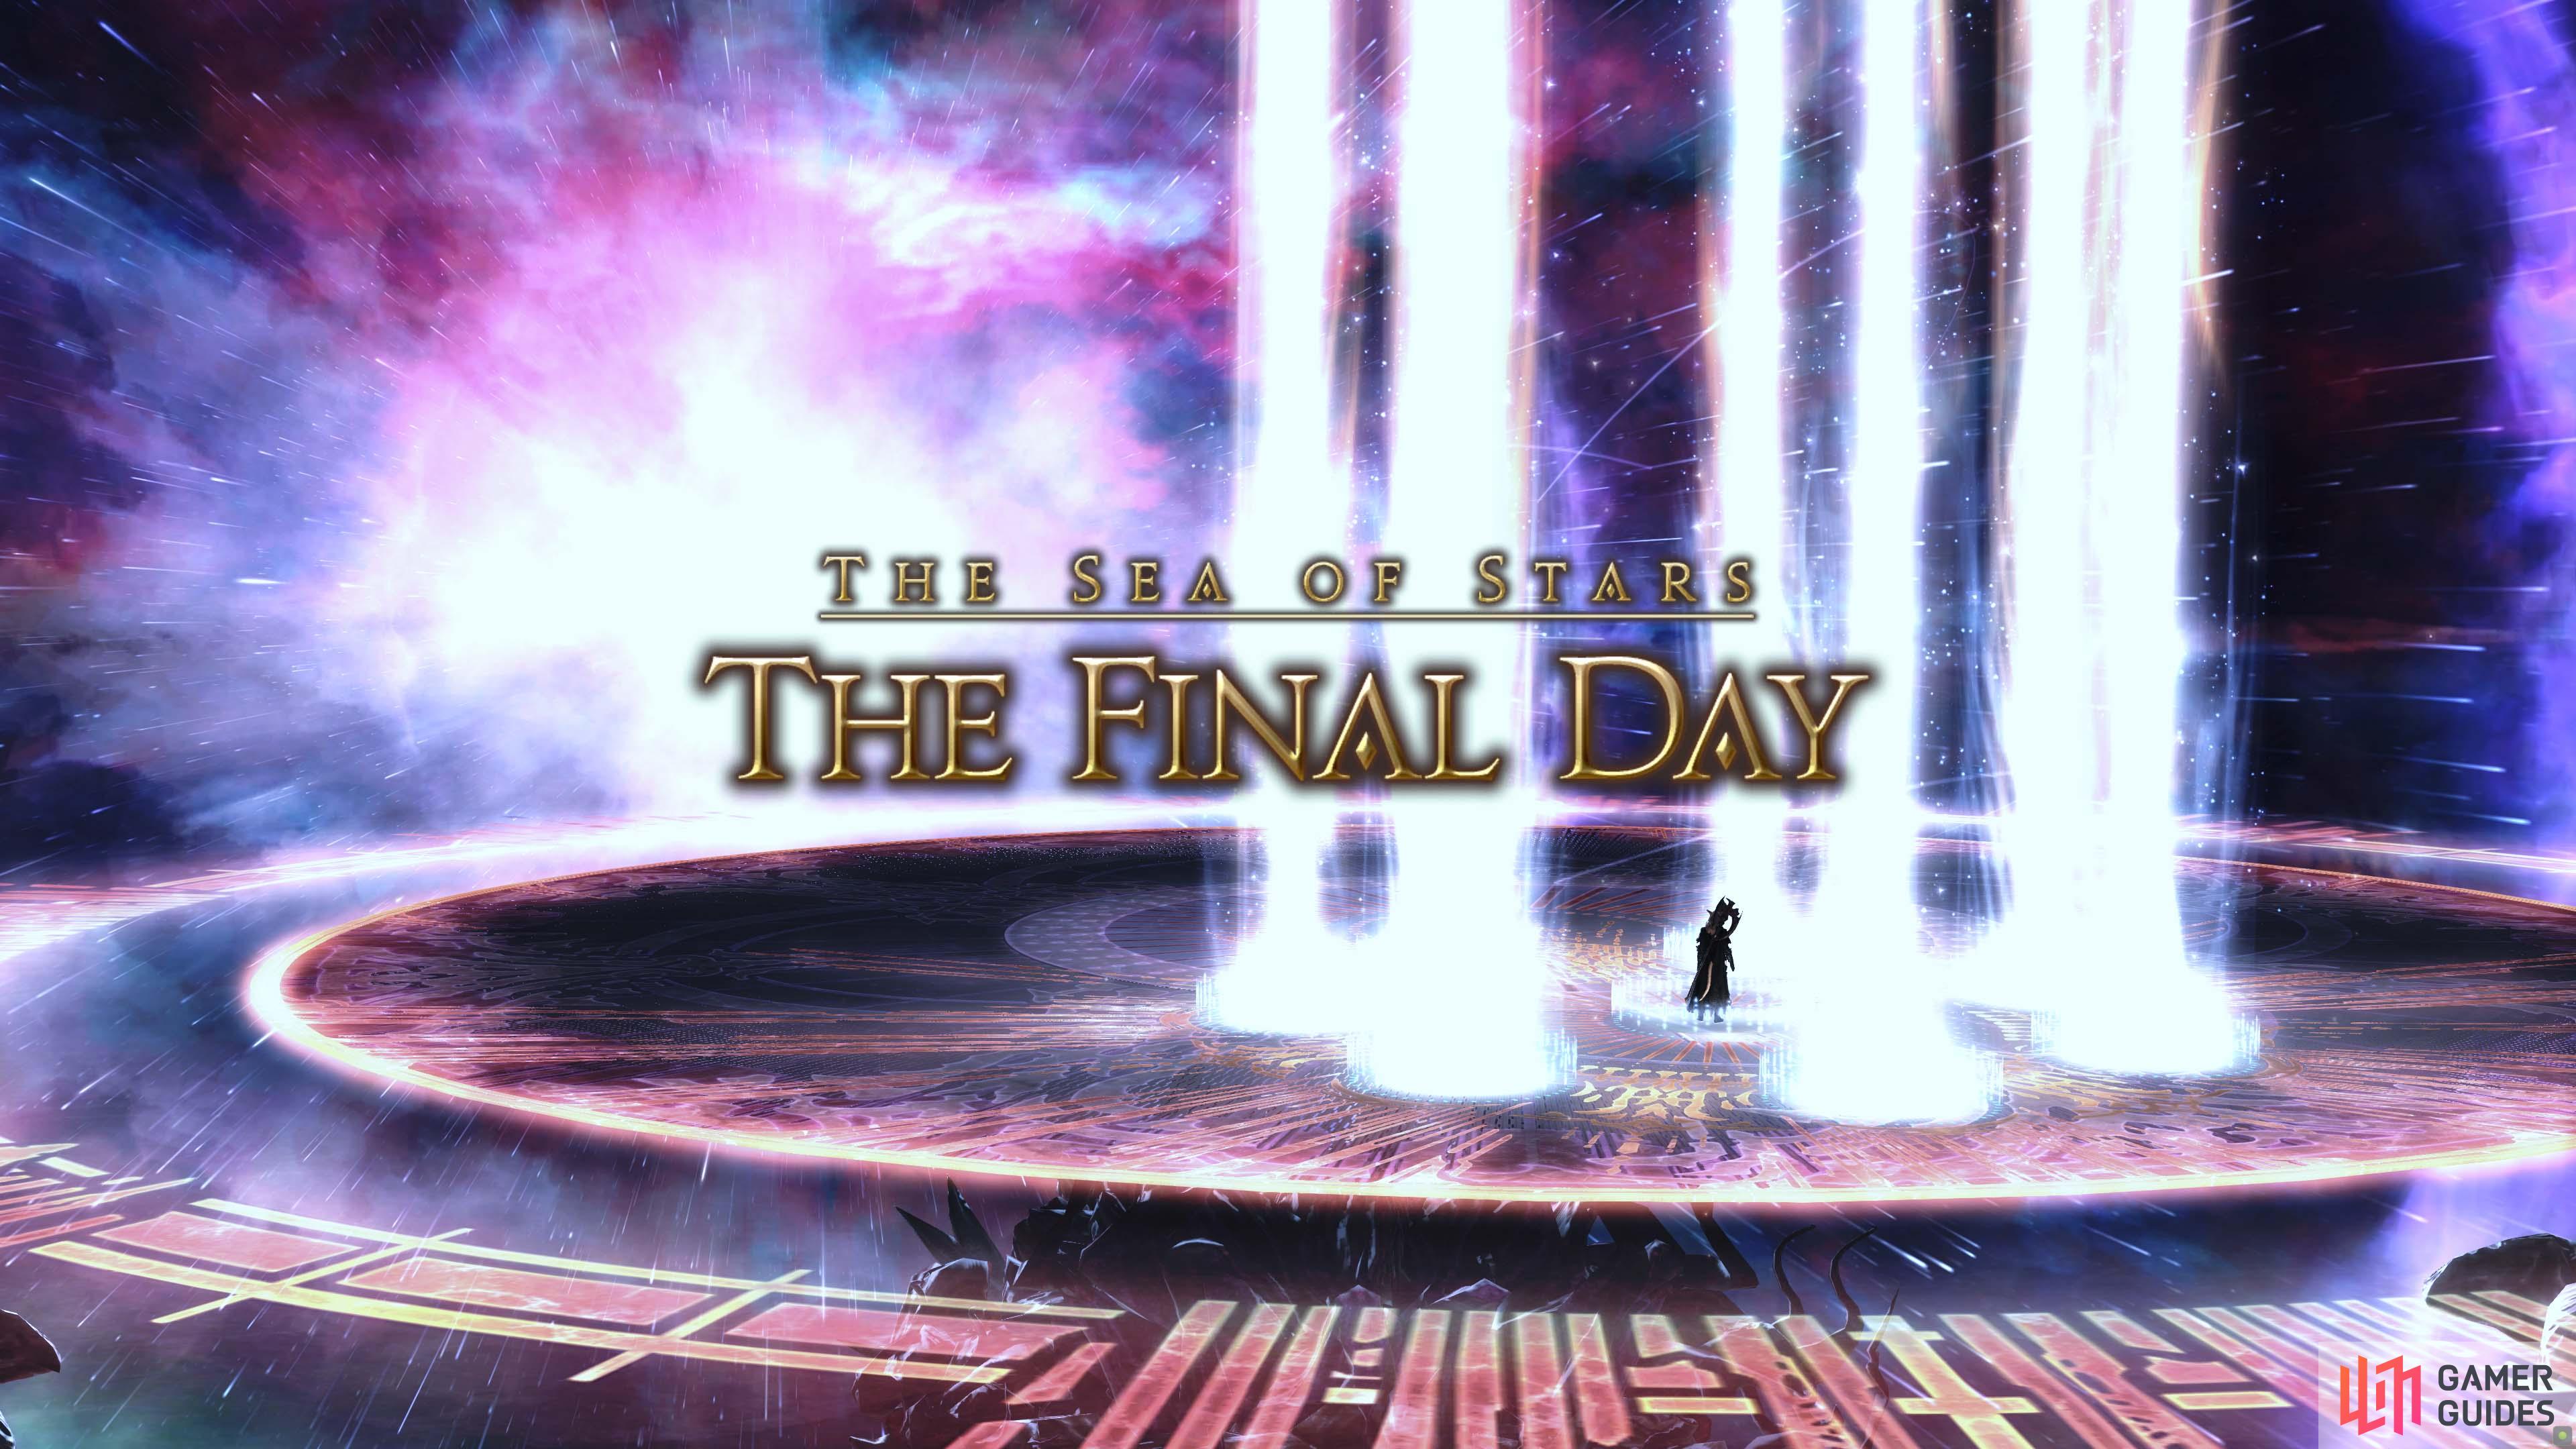 The Sea of Stars - The Final Day